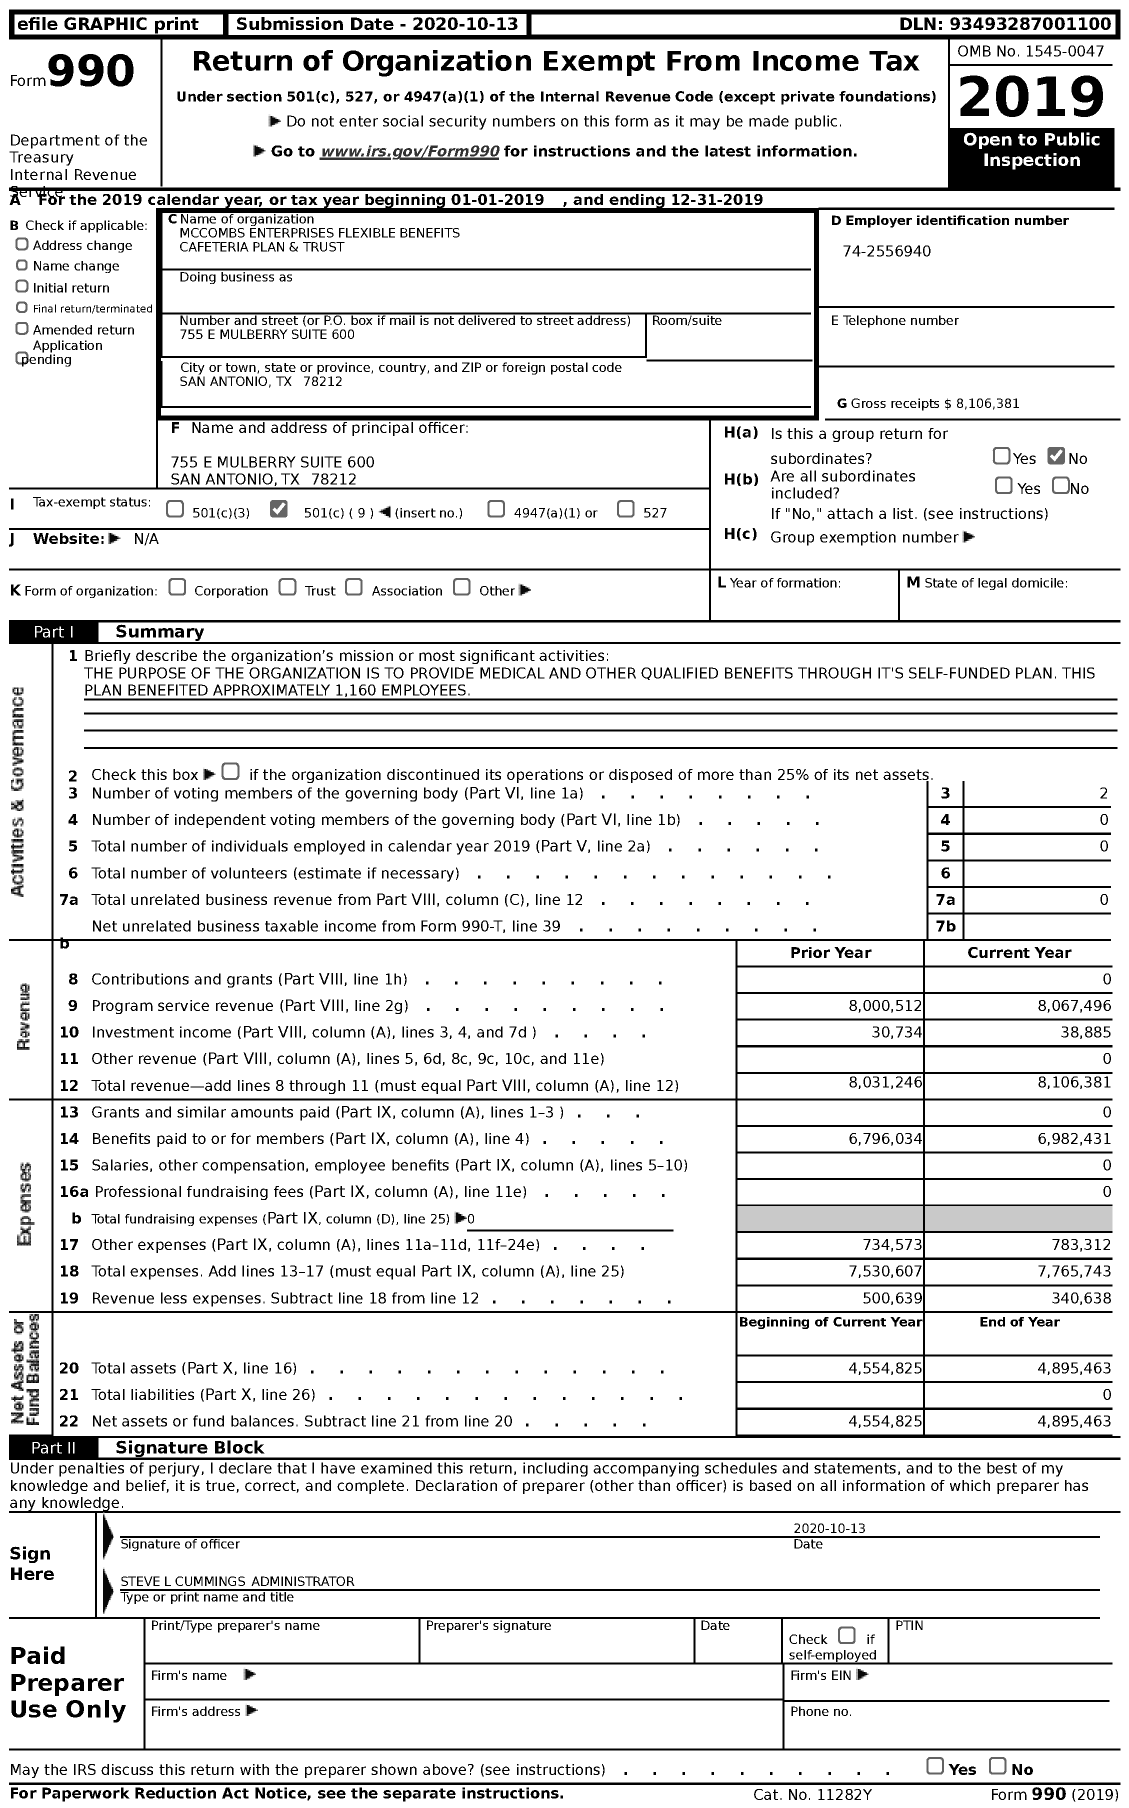 Image of first page of 2019 Form 990 for Mccombs Enterprises Flexible Benefits Cafeteria Plan and Trust